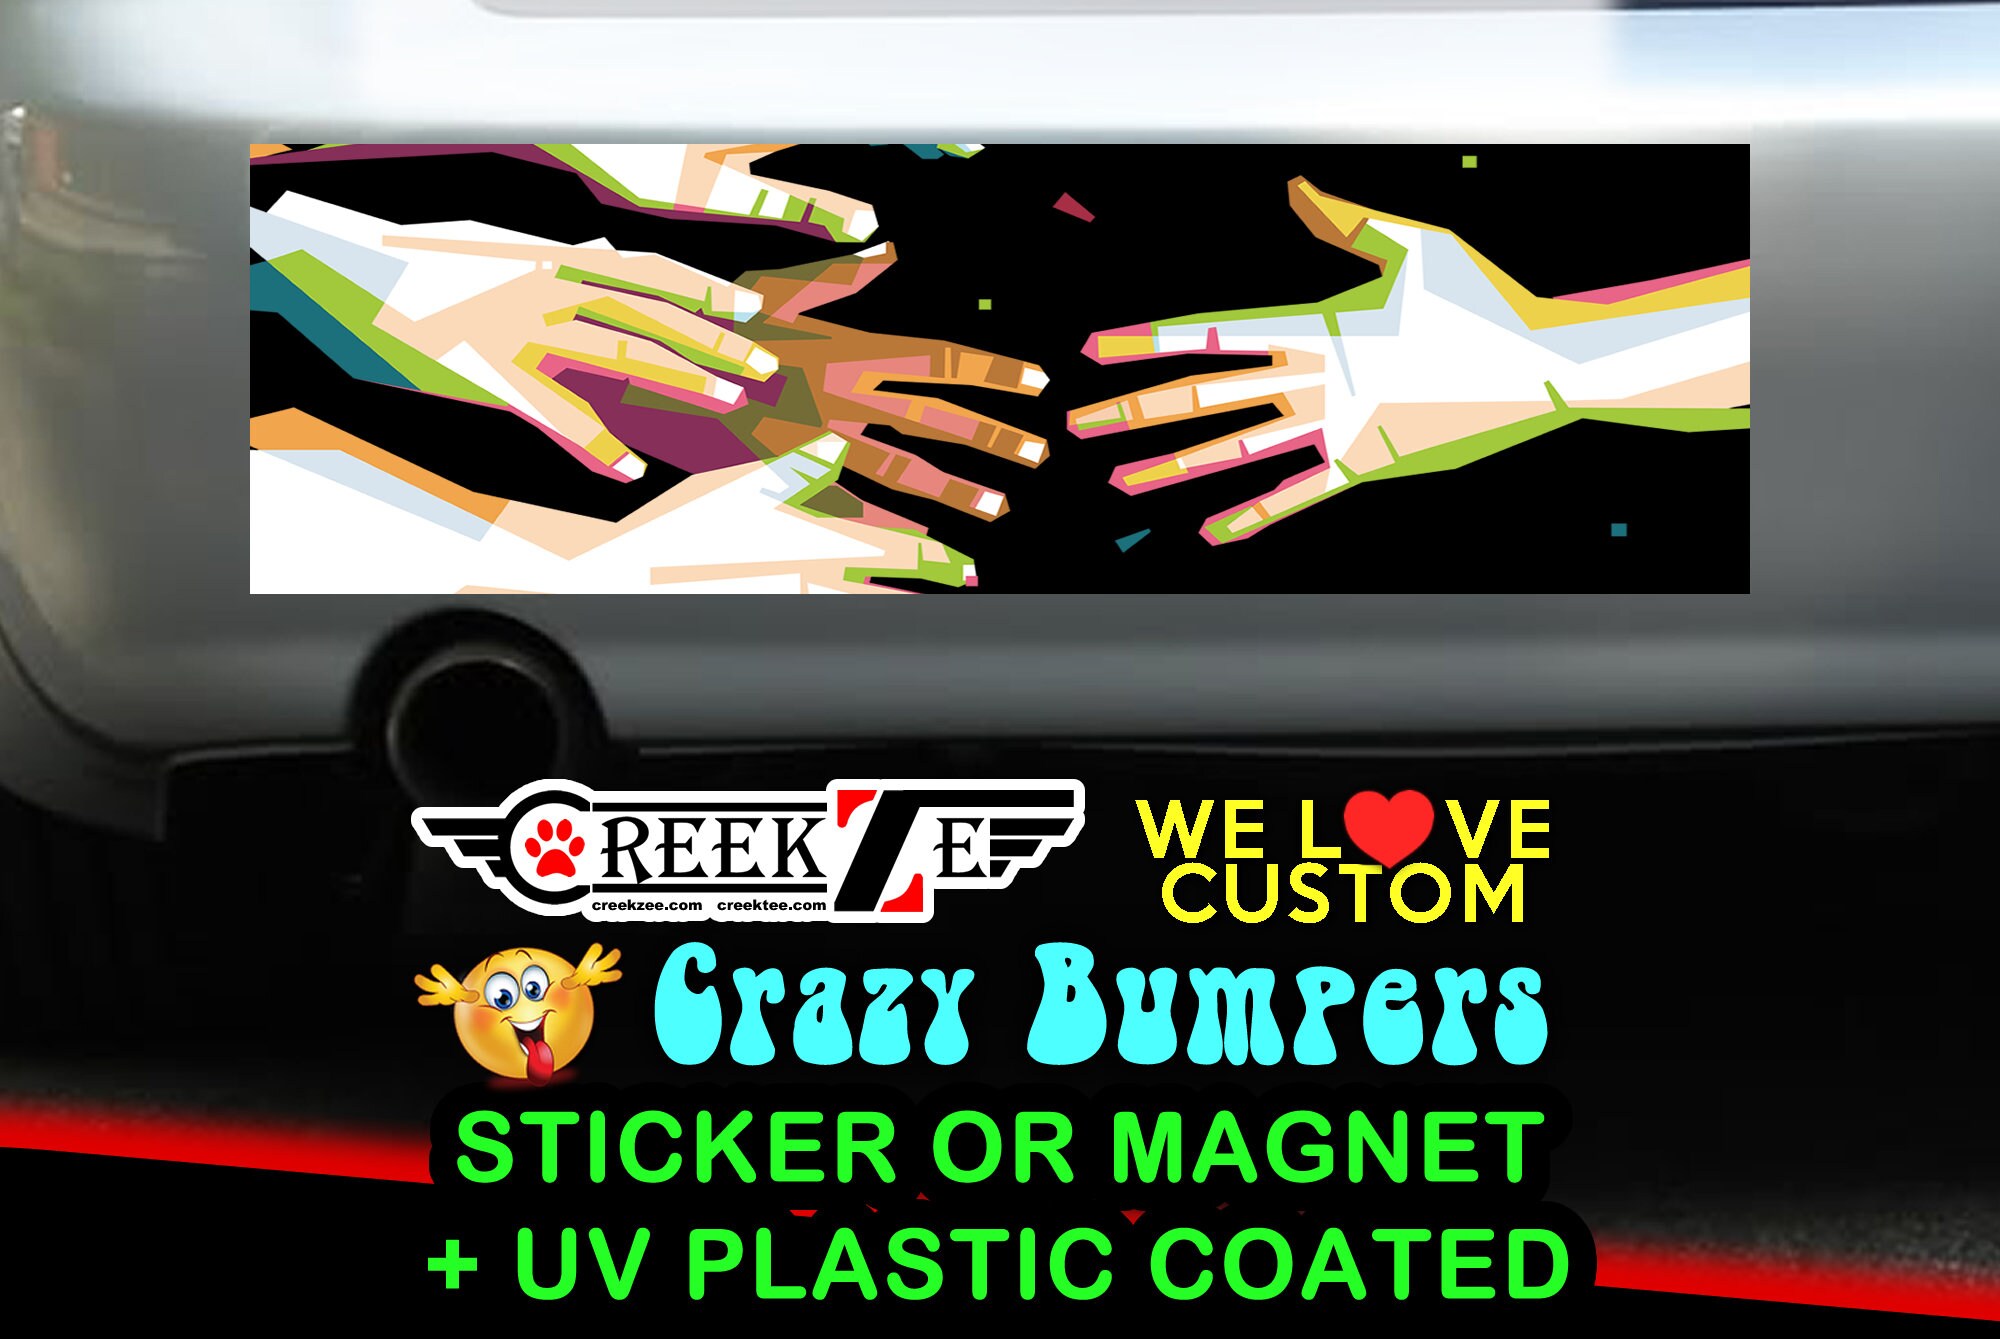 Helping Hand Digital Bumper Sticker or Magnet various sizes available with UV laminate protection